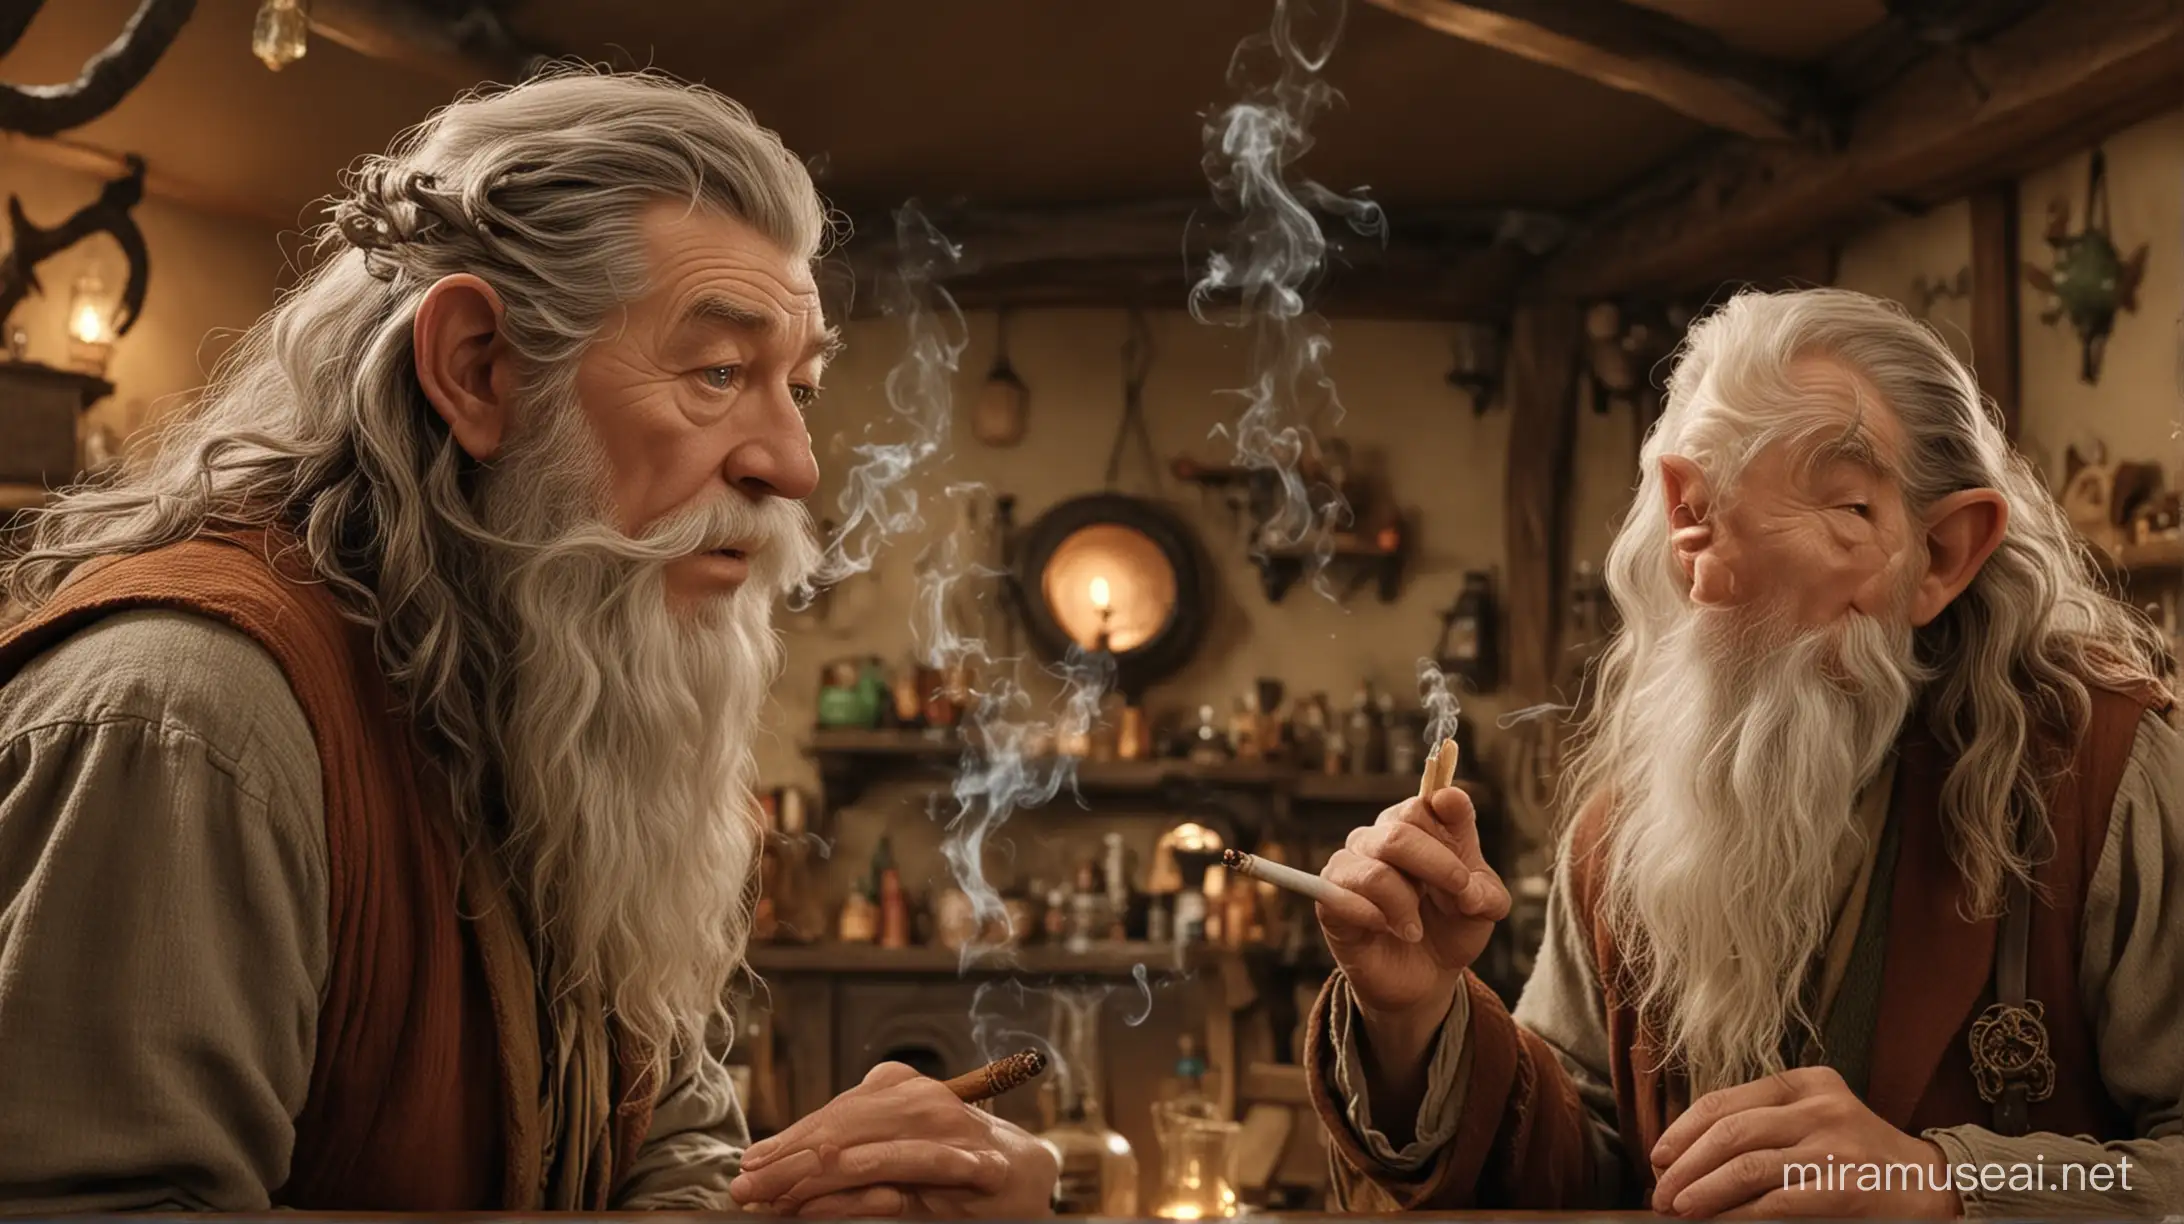 Gandalf and Bilbo Baggins Sharing Psychedelic Experiences in Bilbos Home